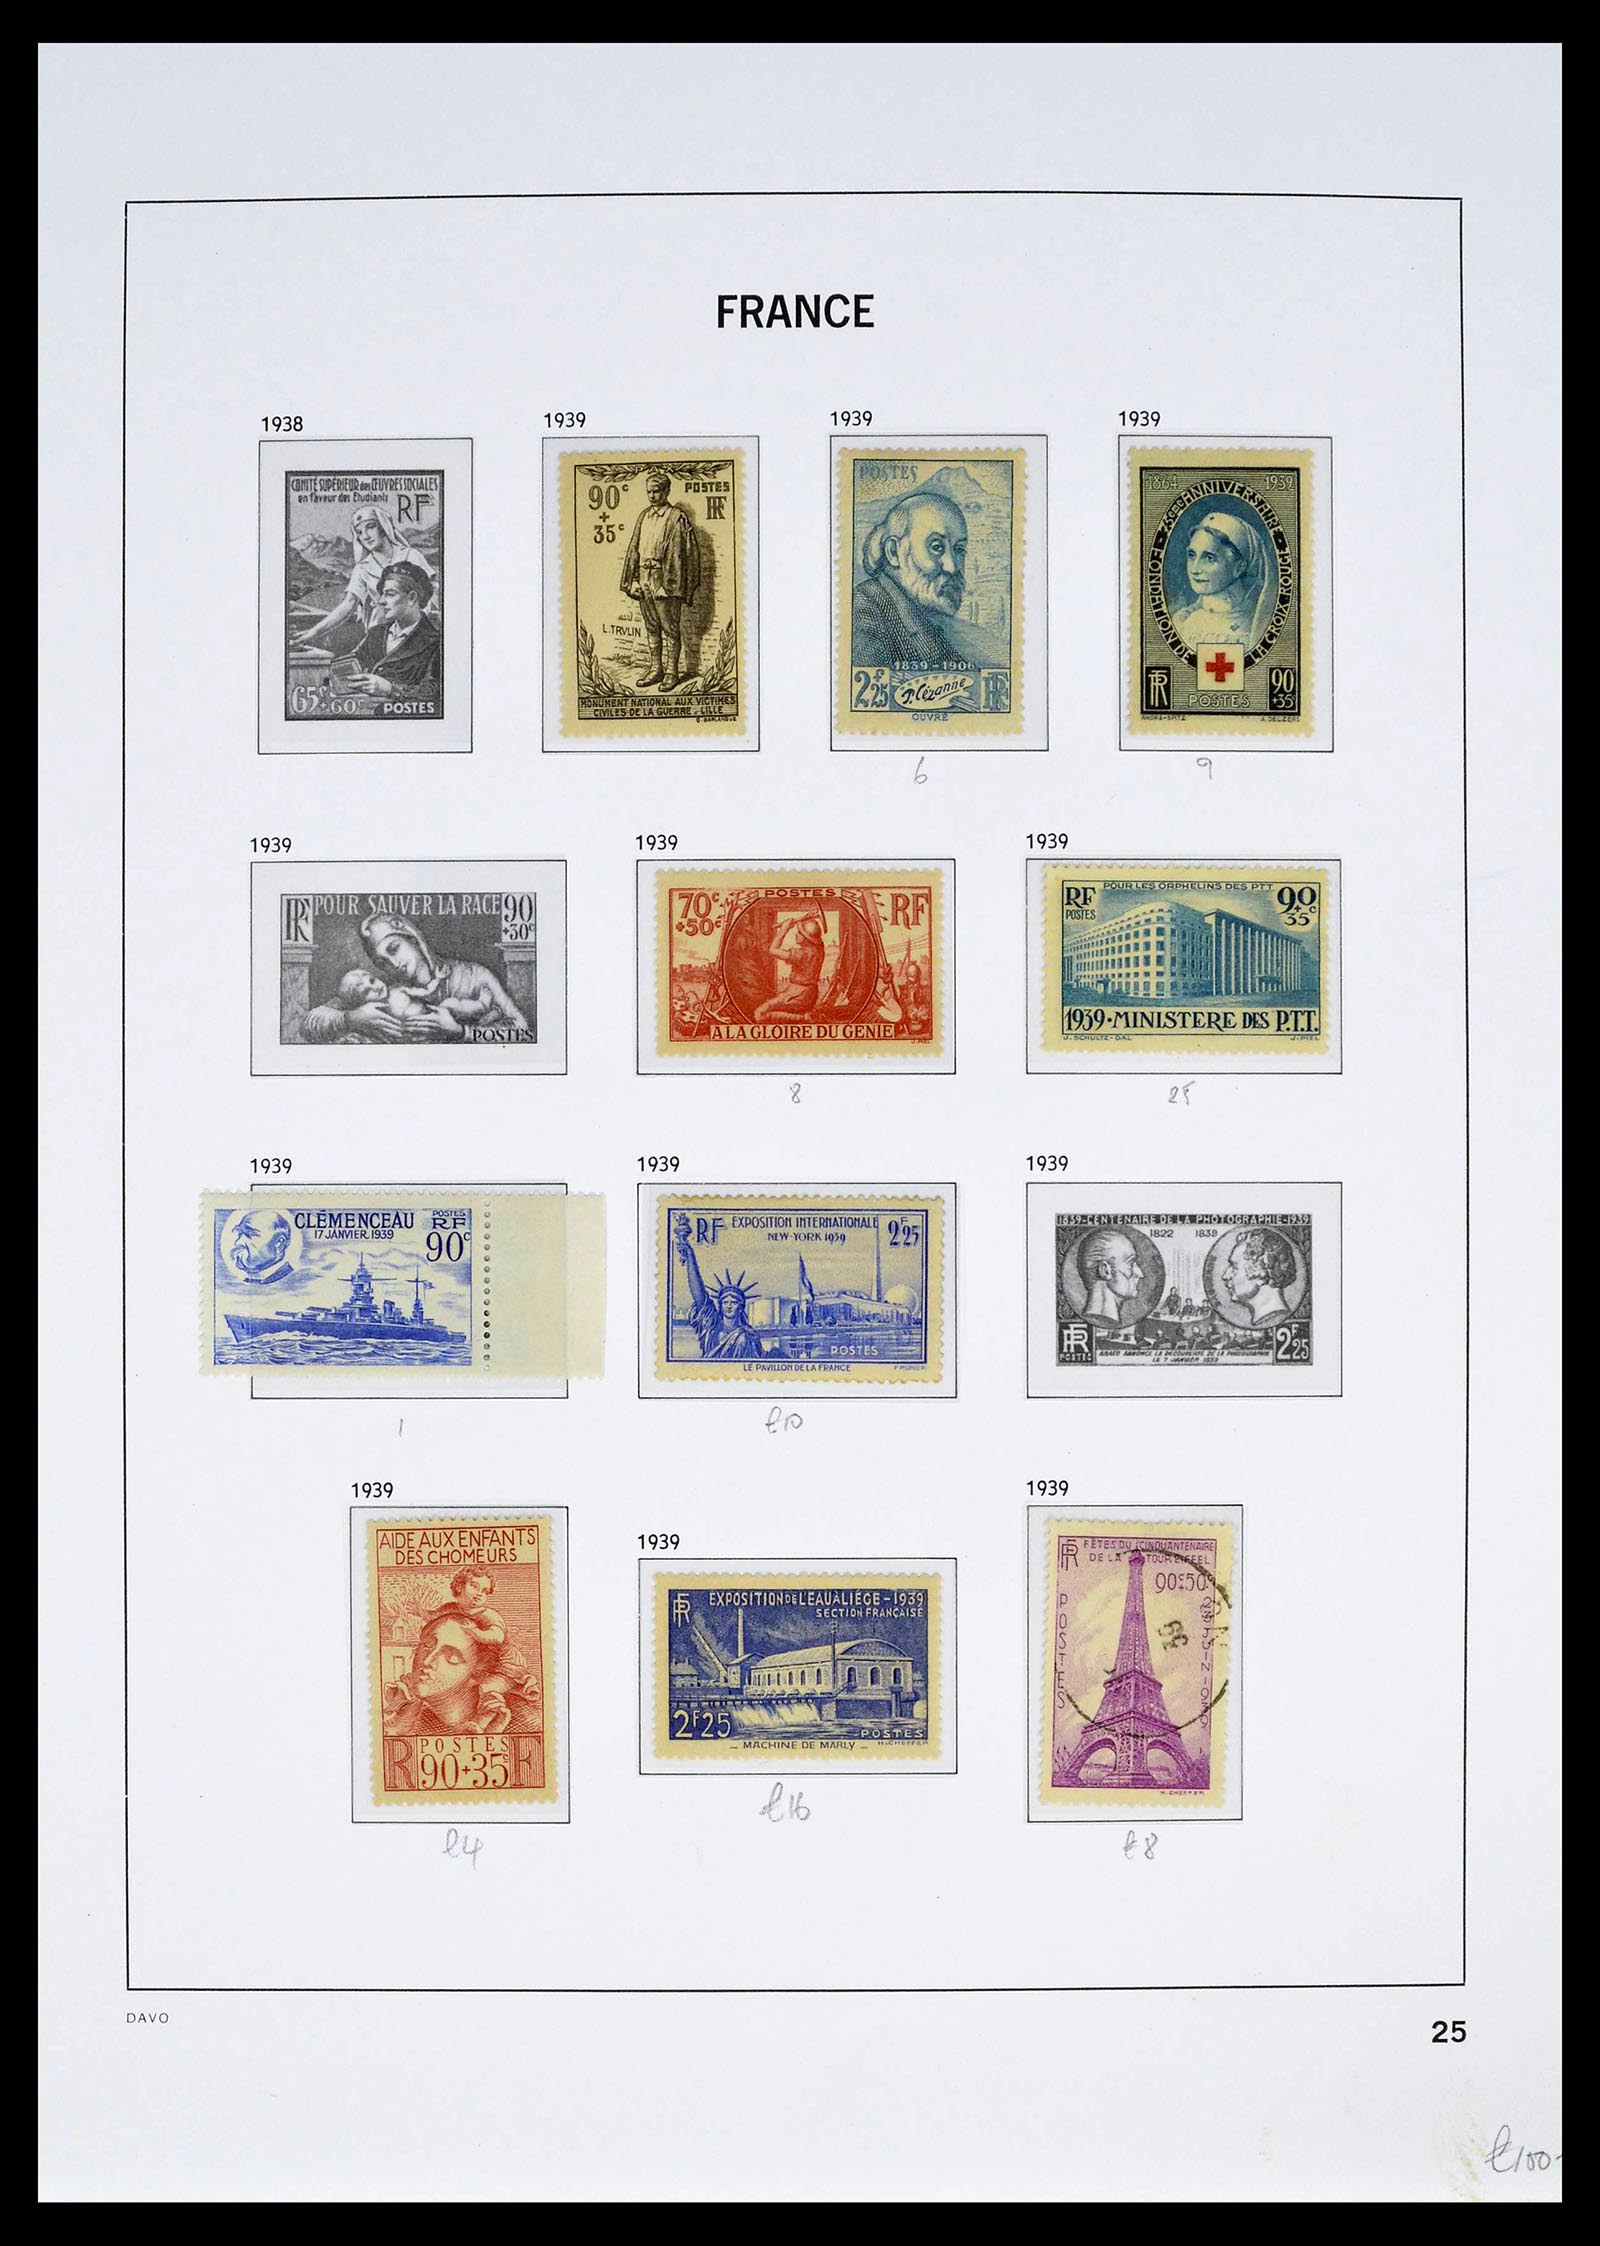 39335 0040 - Stamp collection 39335 France 1849-1969.